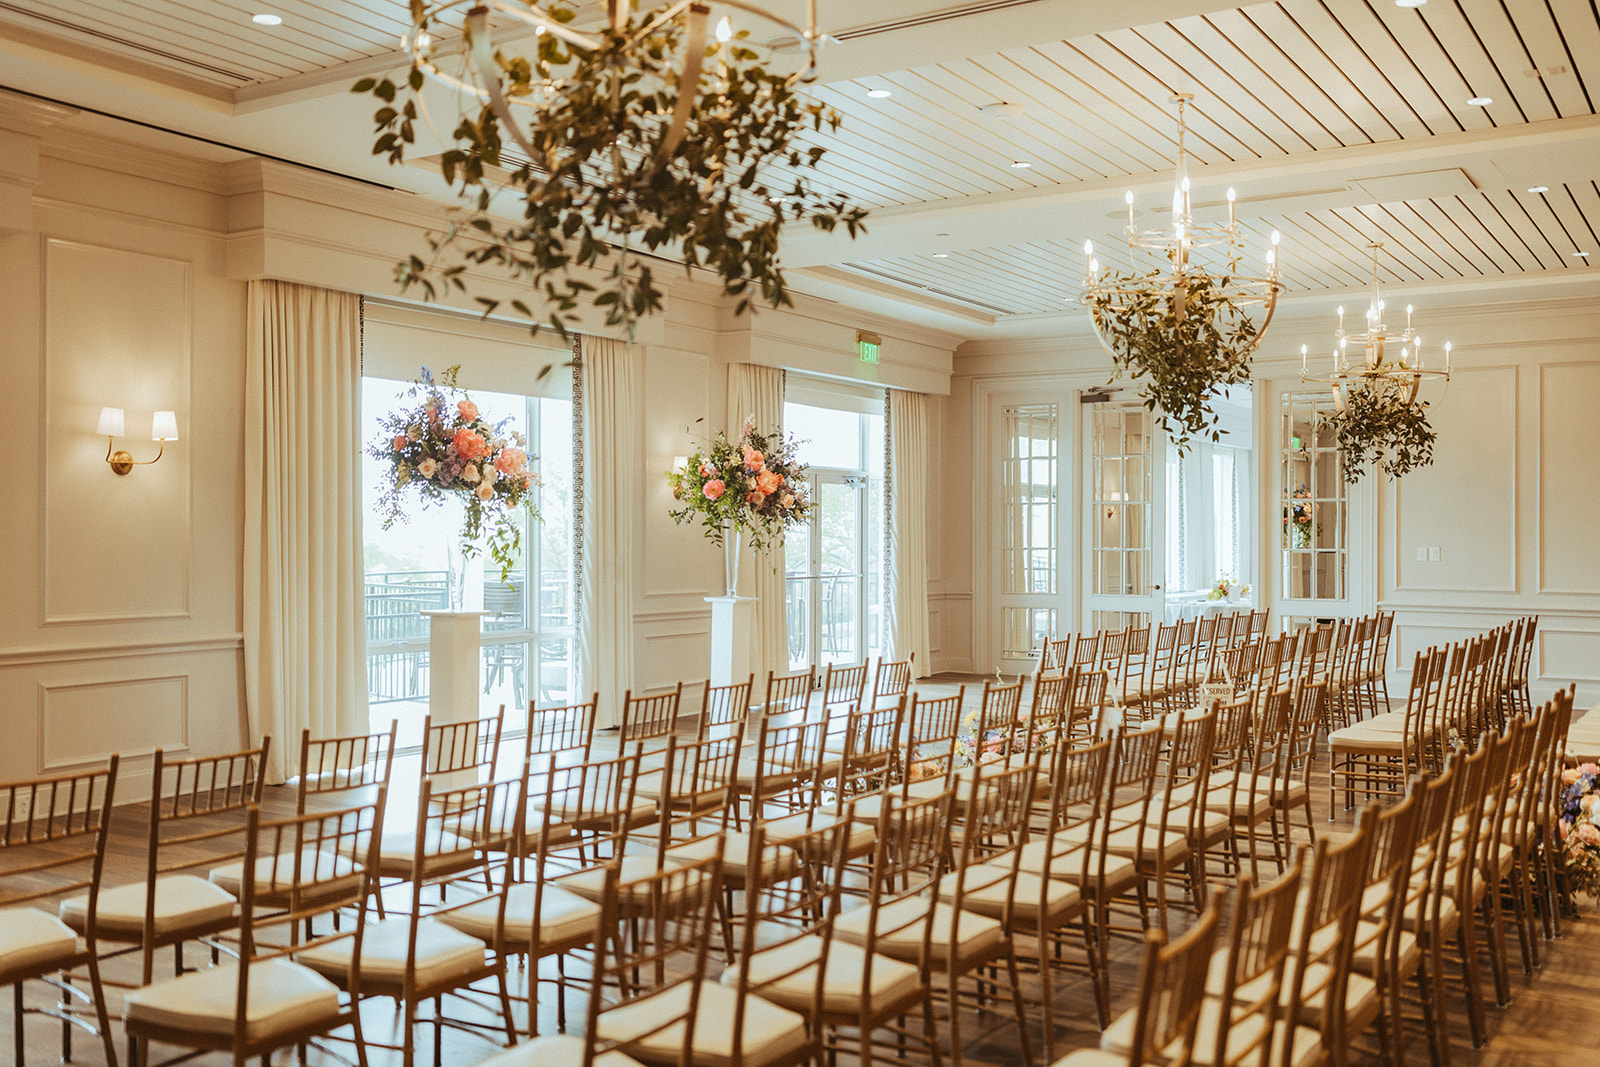 Richland Country Club Wedding with Meaningful Details